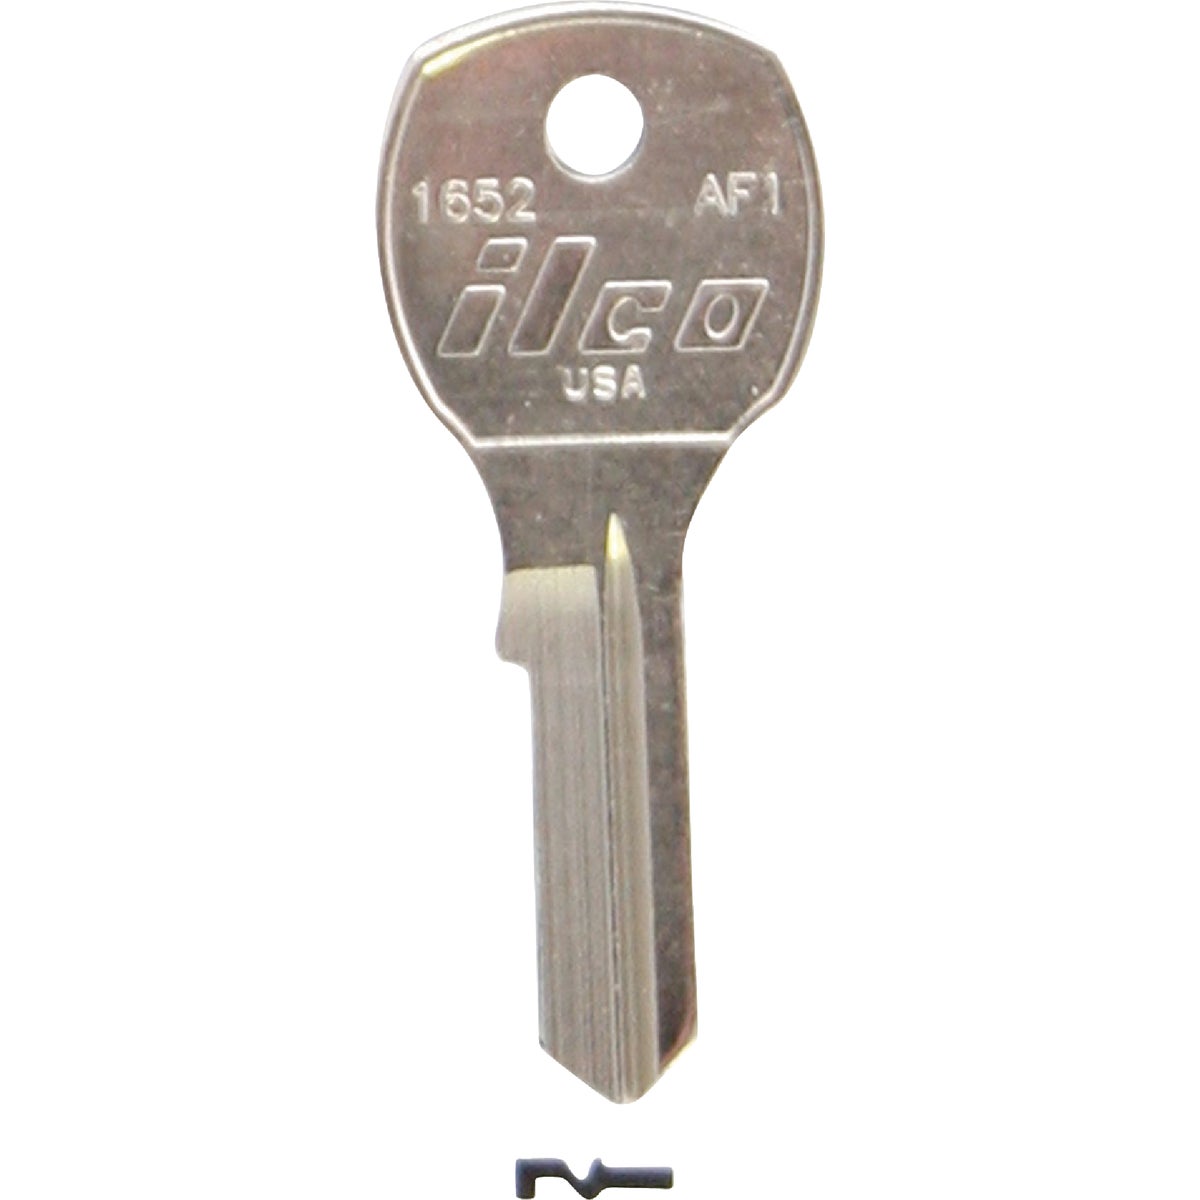 Item 235338, Nickel-plated key blank. When you order one, you will receive 10 keys.